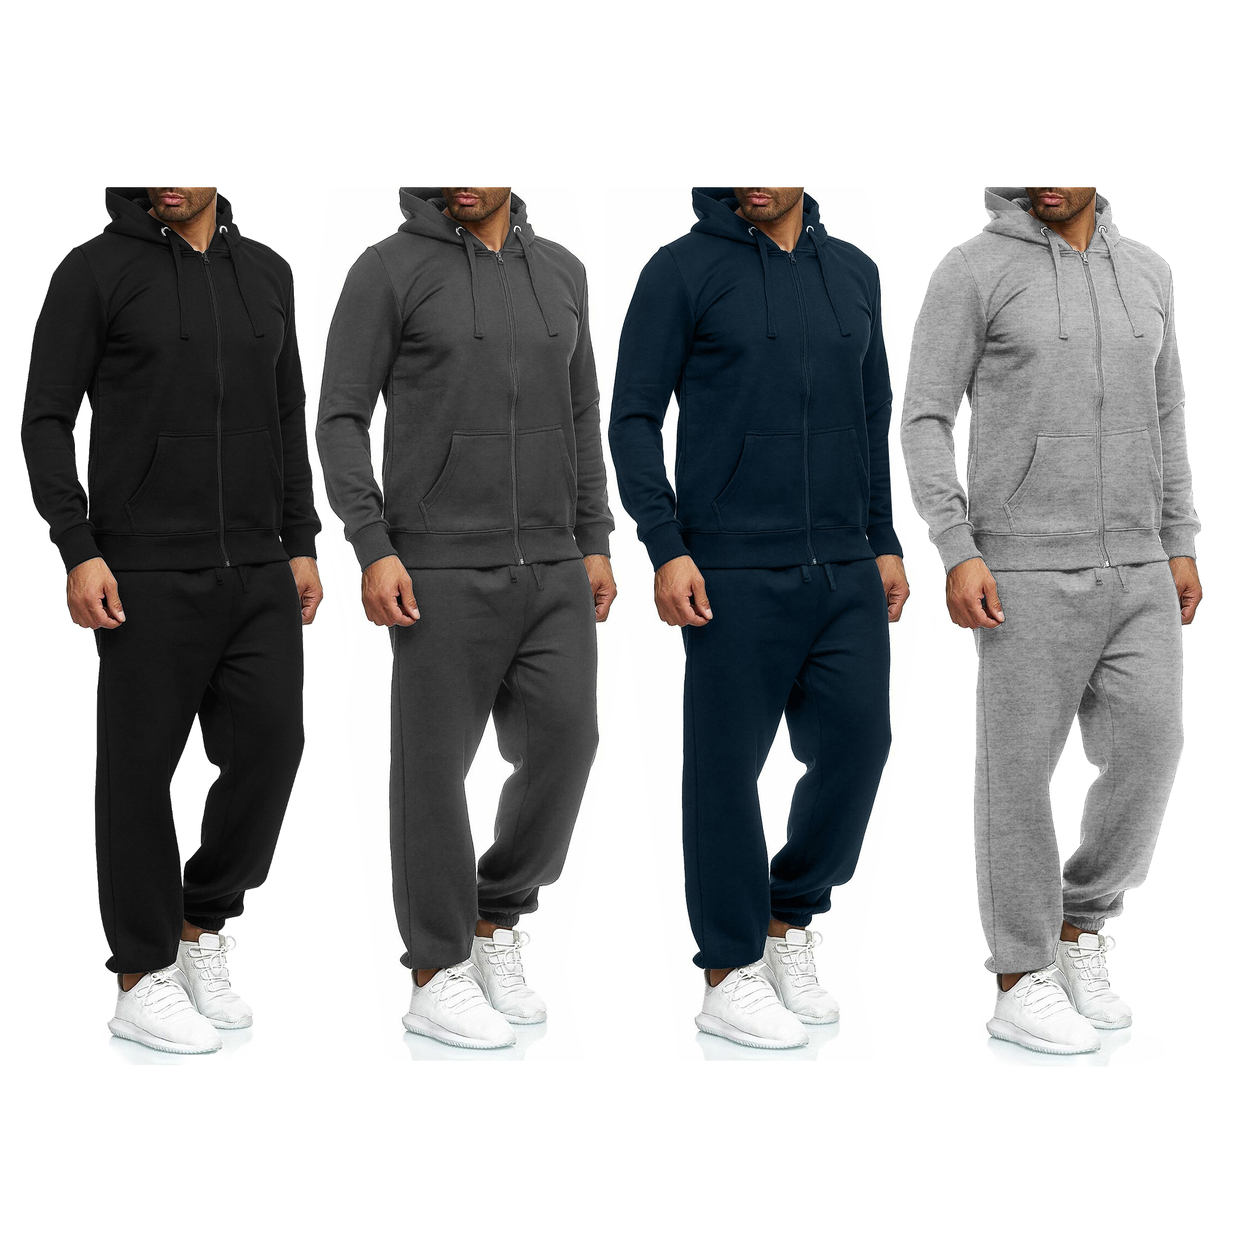 Multi-Pack: Men's Casual Big & Tall Athletic Active Winter Warm Fleece Lined Full Zip Tracksuit Jogger Set - Black, 2-pack, Large